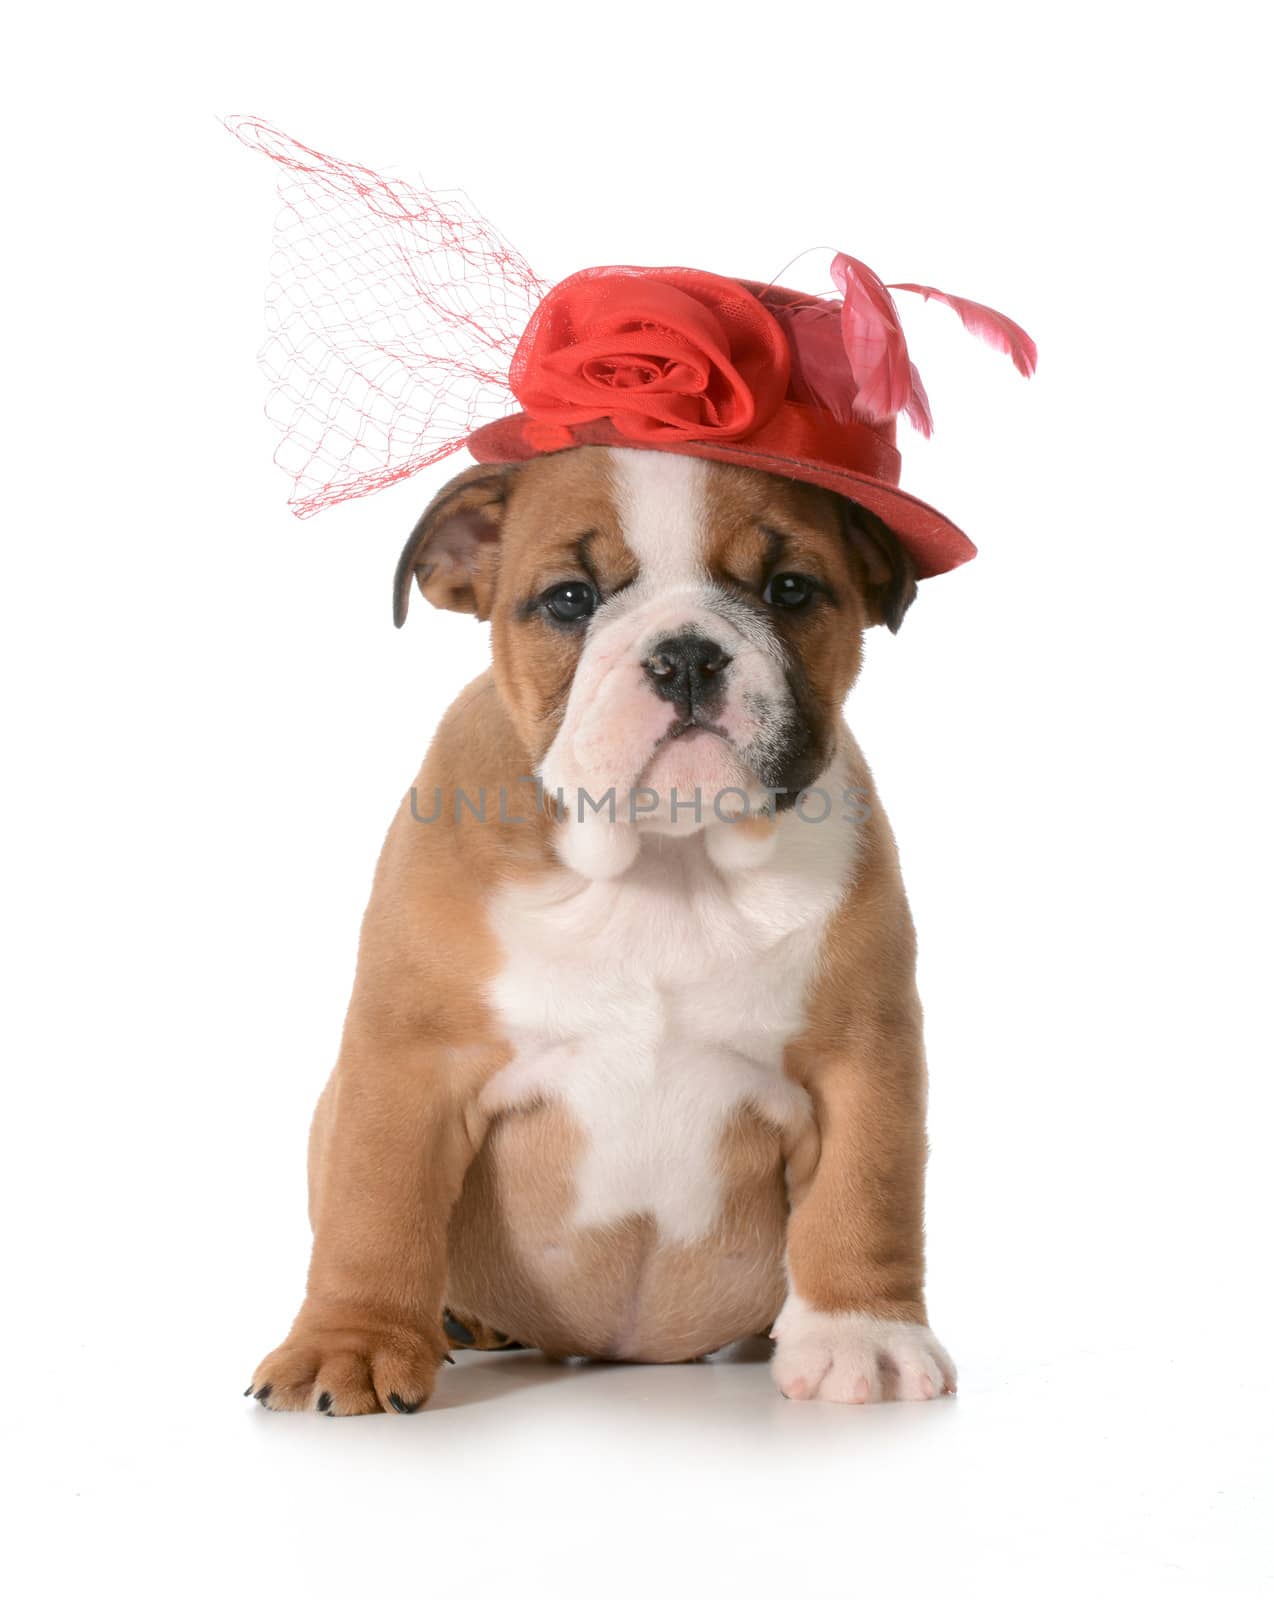 female puppy - english bulldog wearing red hat isolated on white background - 7 weeks old